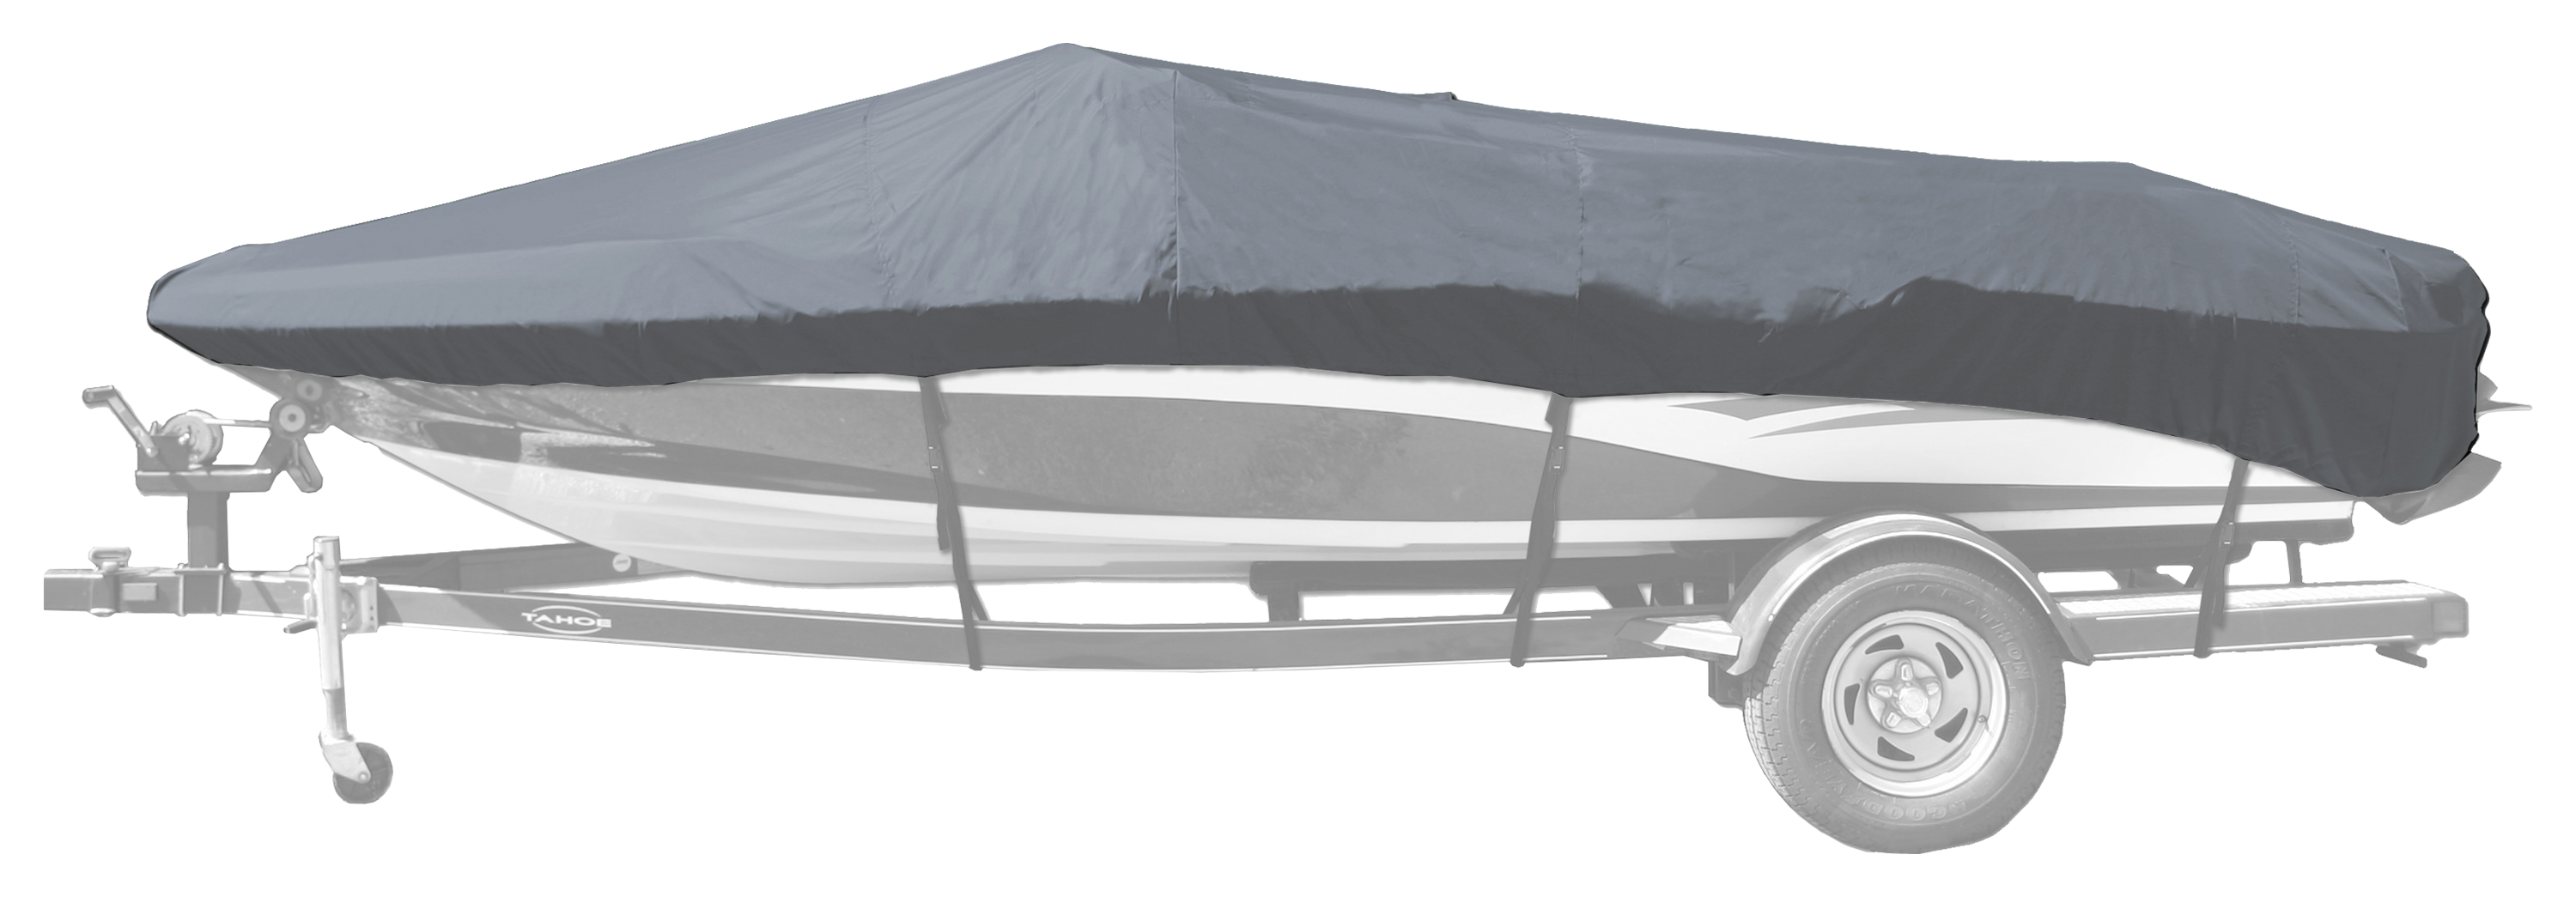 Bass Pro Shops Select Fit Hurricane Boat Cover by Westland for Euro V-Hull Runabout I/O Model - Gray - 19'6'' to 20'5